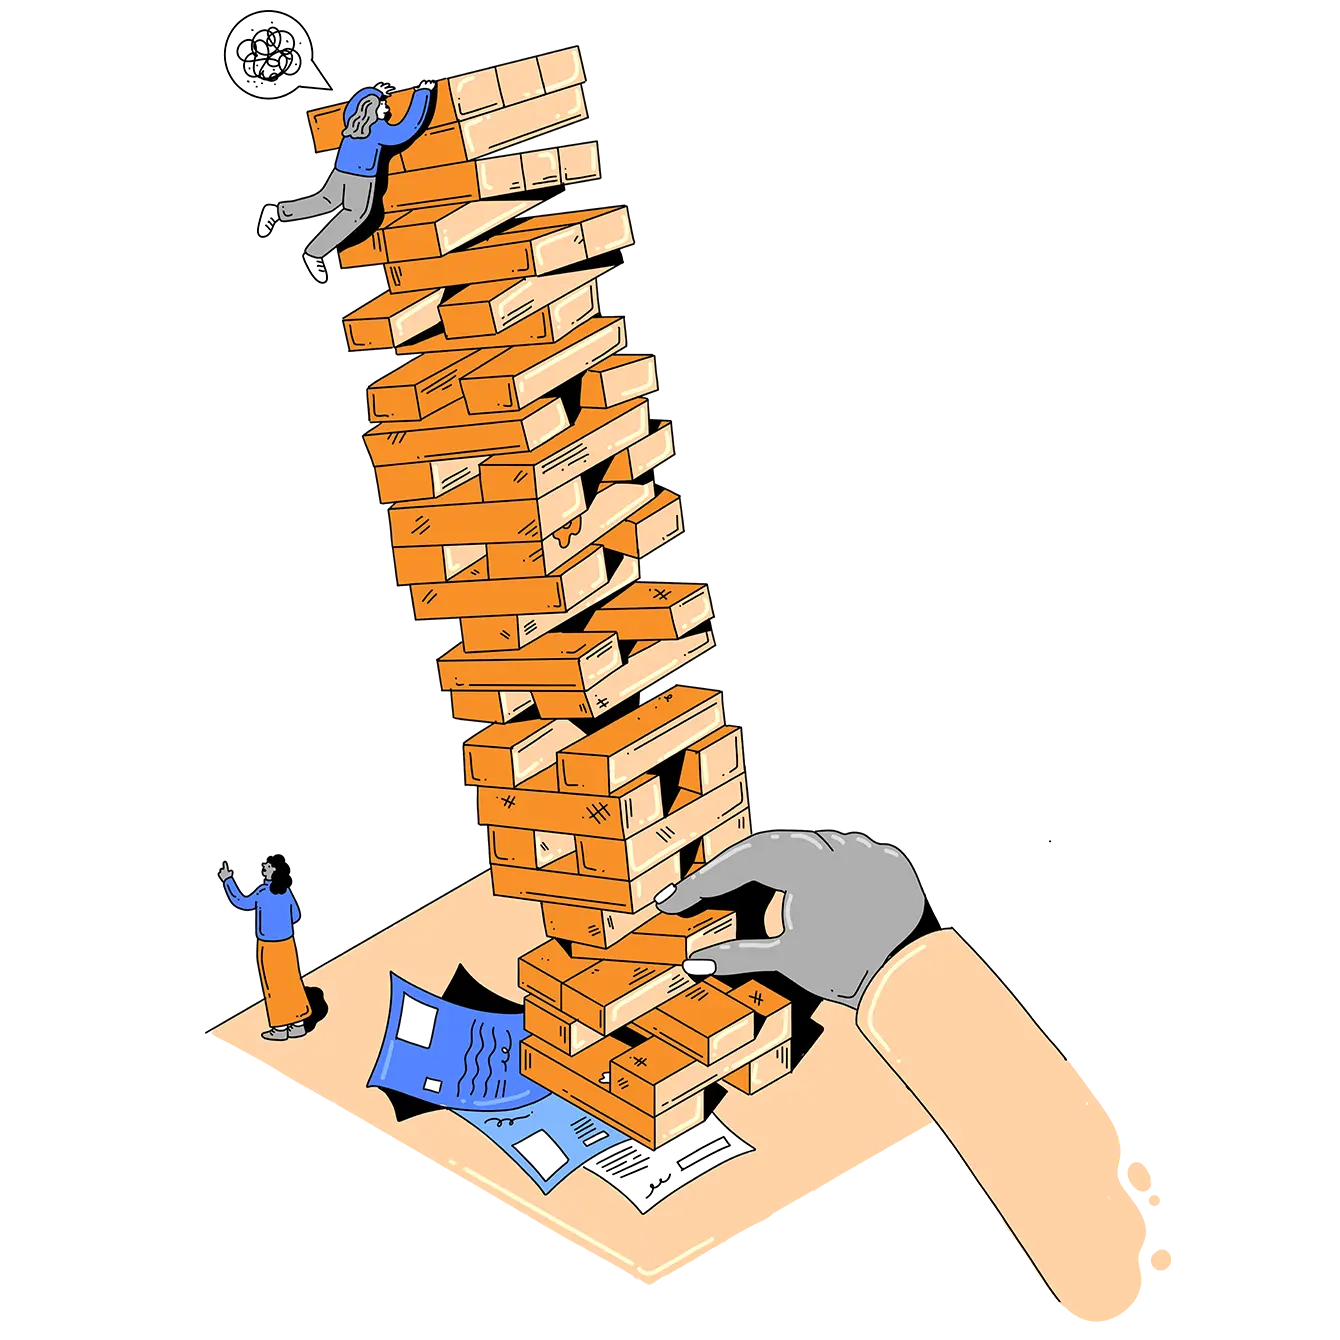 A person falling off a tower of collapsing blocks